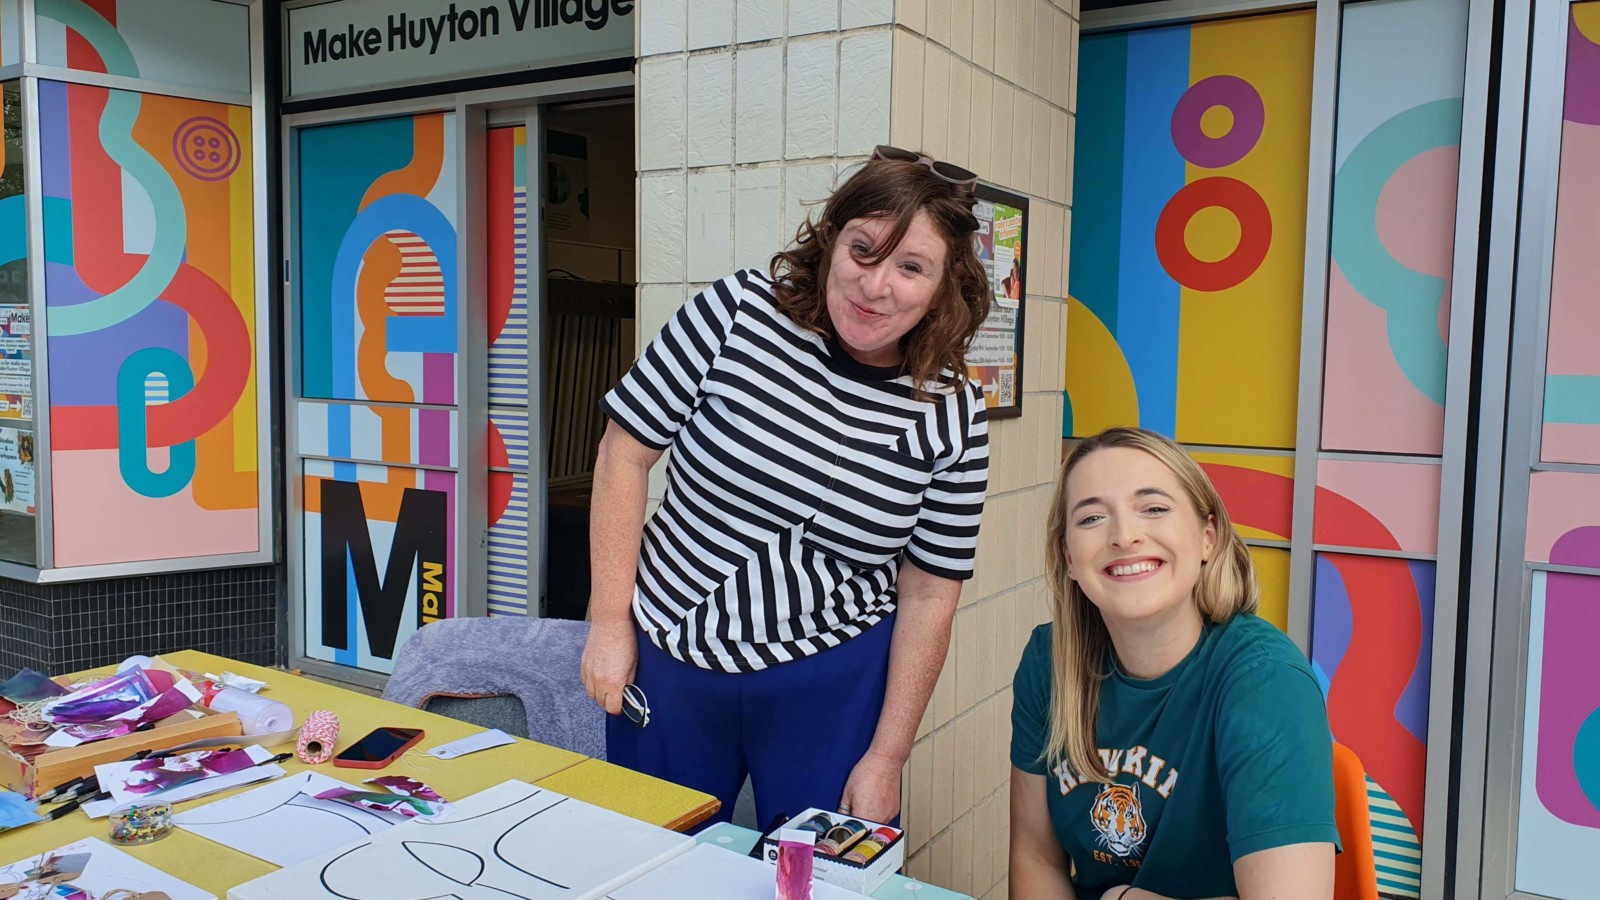 Producer Rhyannon and Heart of Glass collaborator Cathy Cross sit at a table outside the front of Make Huyton Village smiling at the camera. There are craft materials and heart of glass flyers on the table.